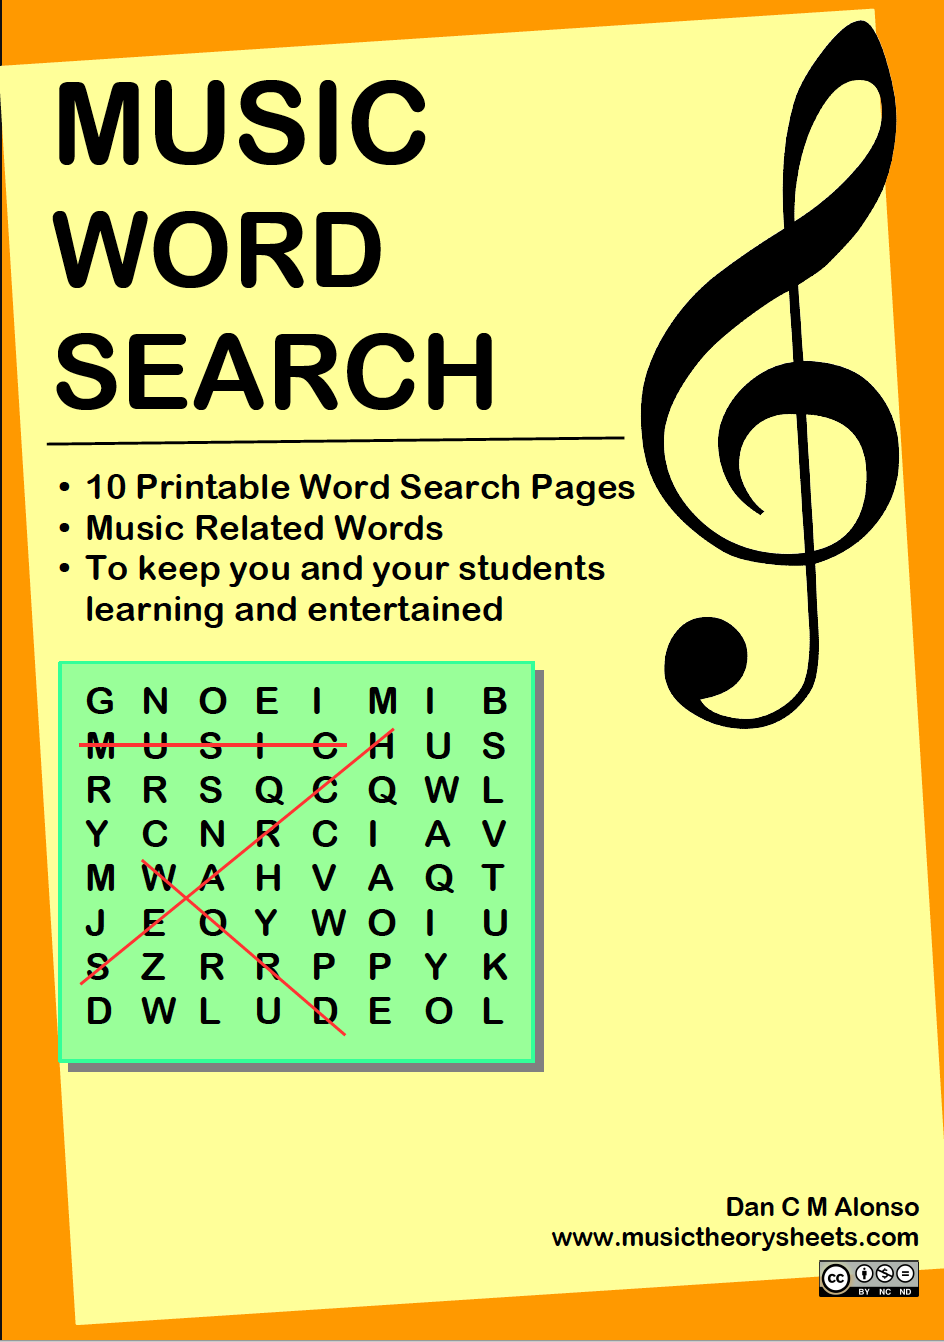 Download wordsearch 12